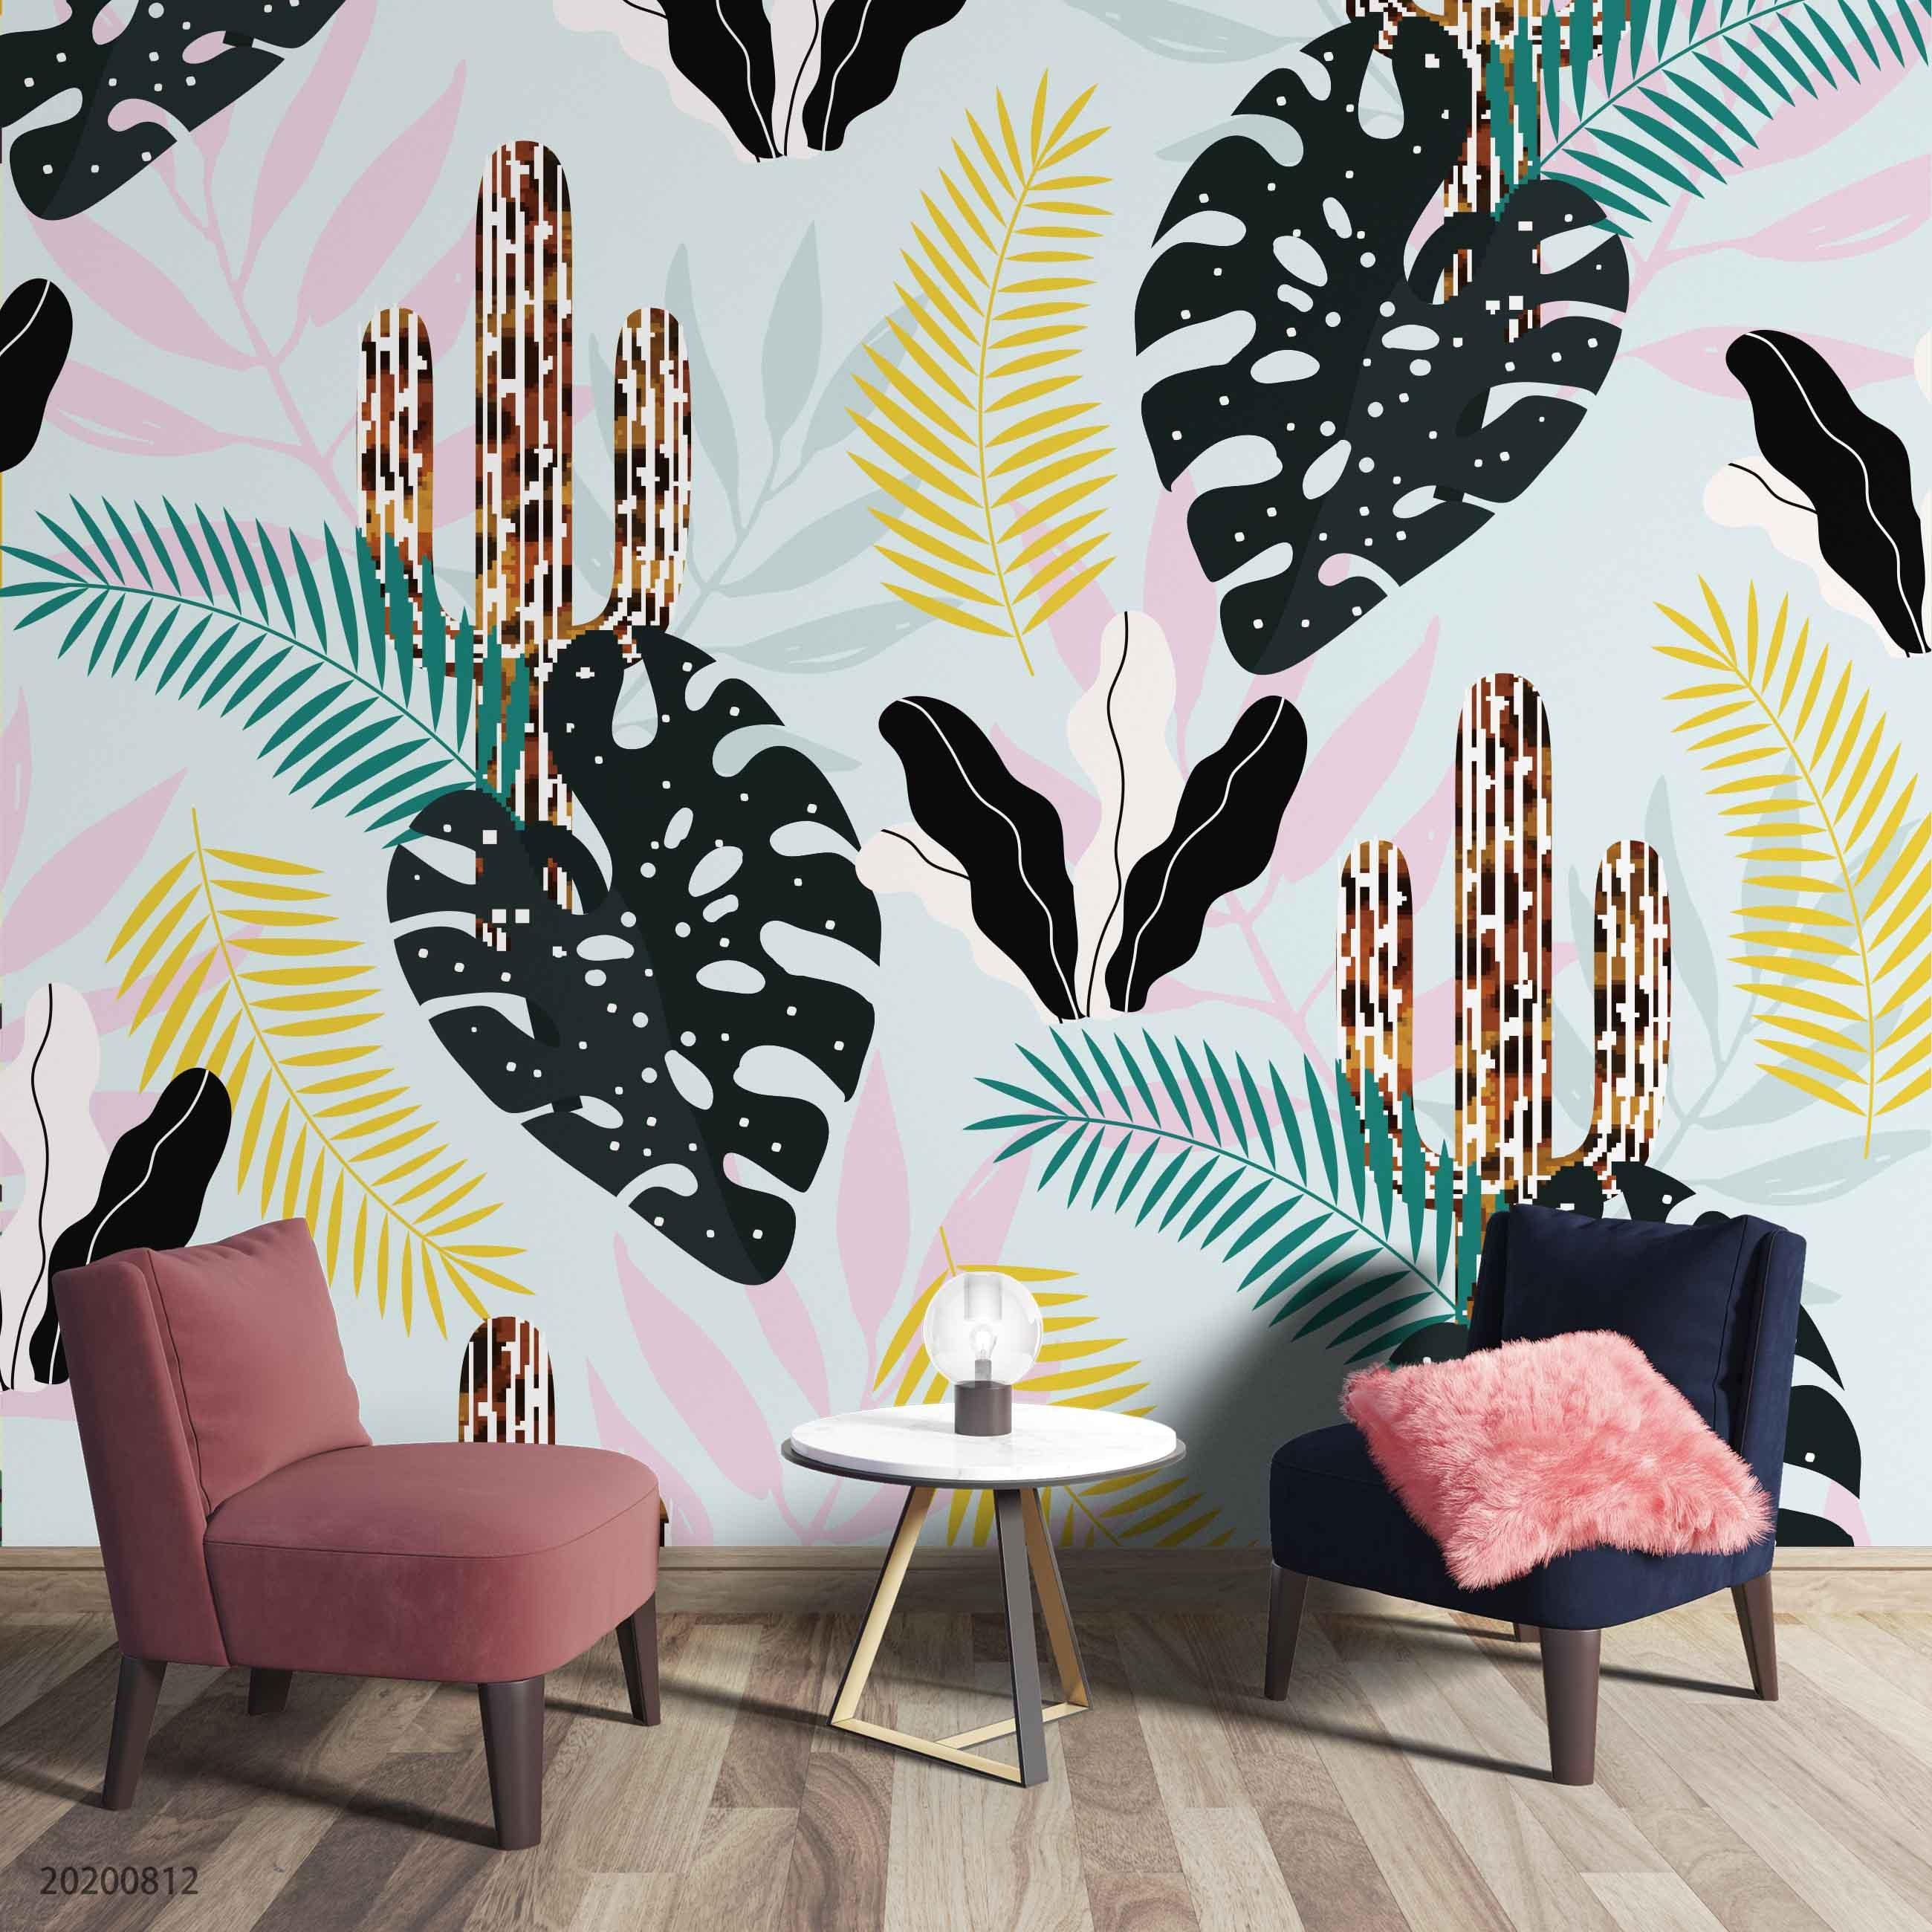 3D Hand Sketching Colorful Giant Leaves Wall Mural Wallpaper LXL 1108- Jess Art Decoration